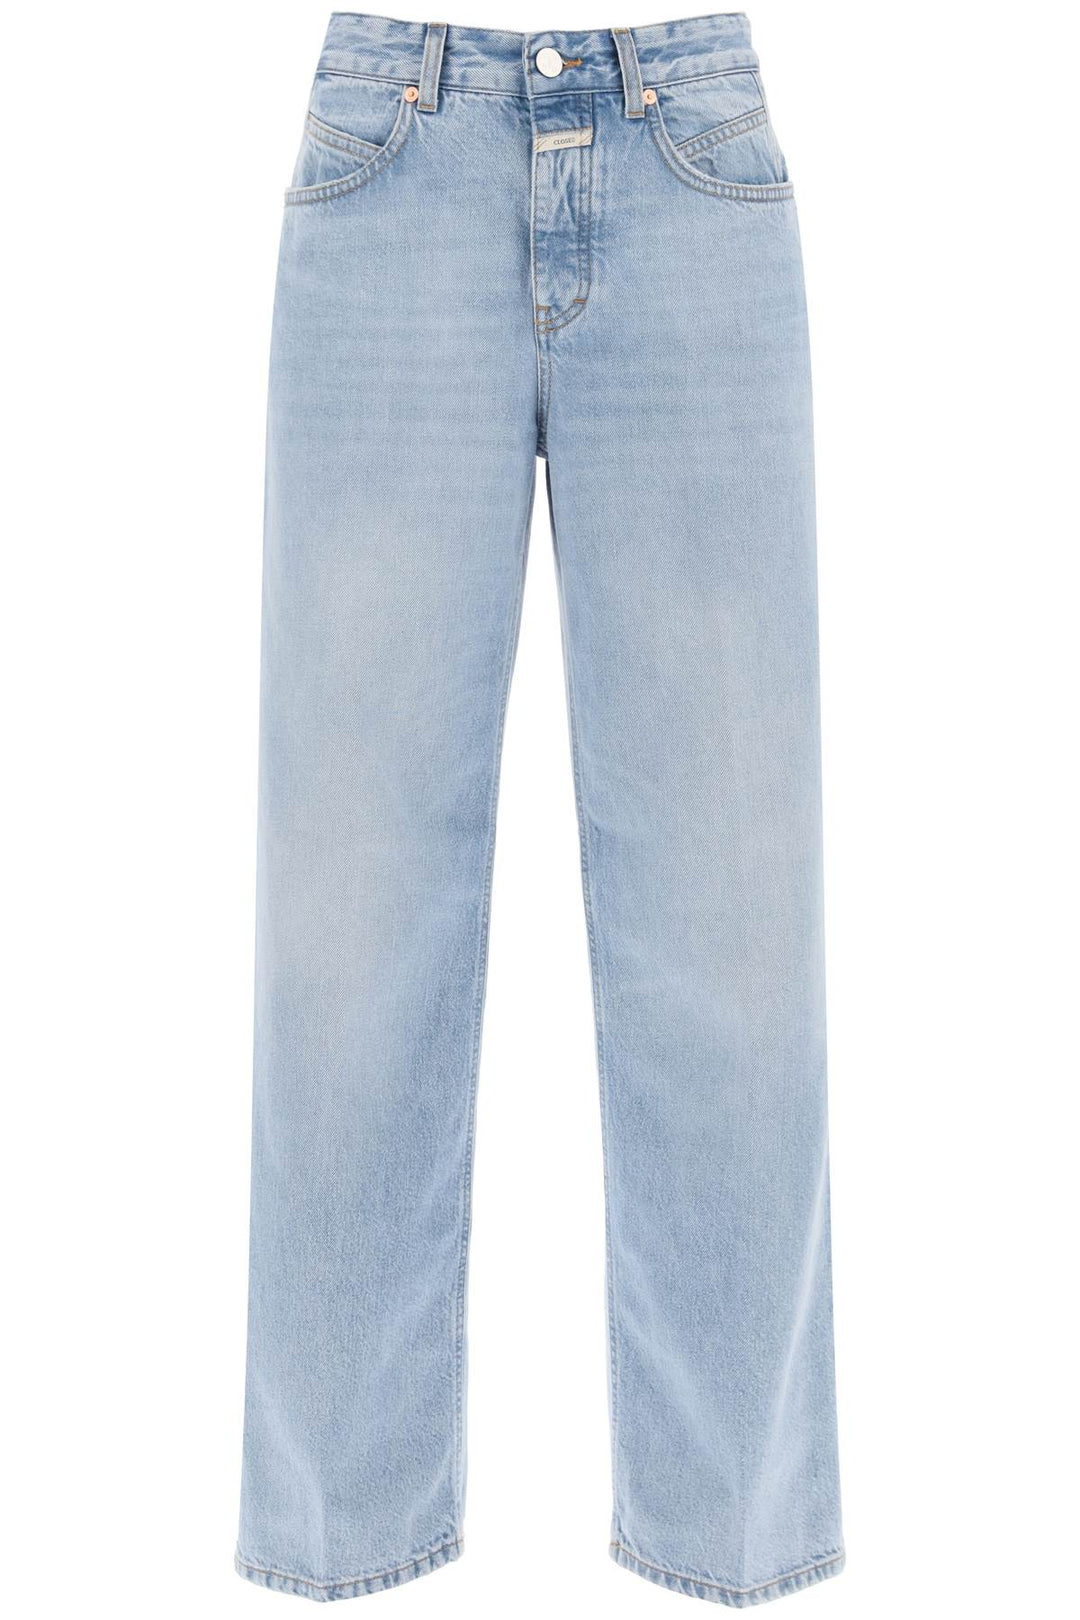 Closed Loose Jeans With Tapered Cut   Celeste